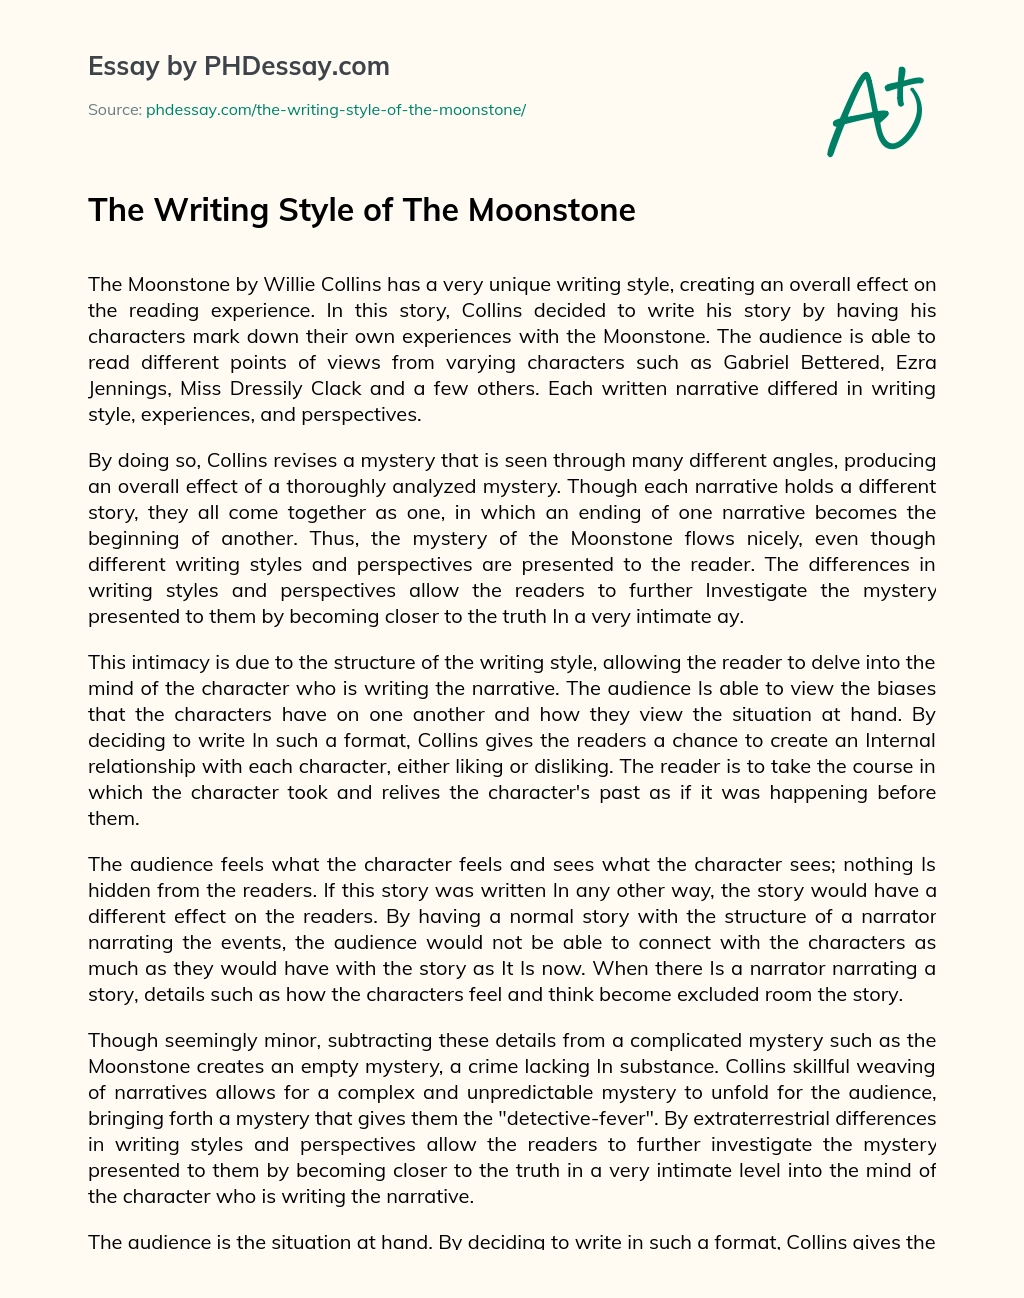 The Writing Style of The Moonstone essay